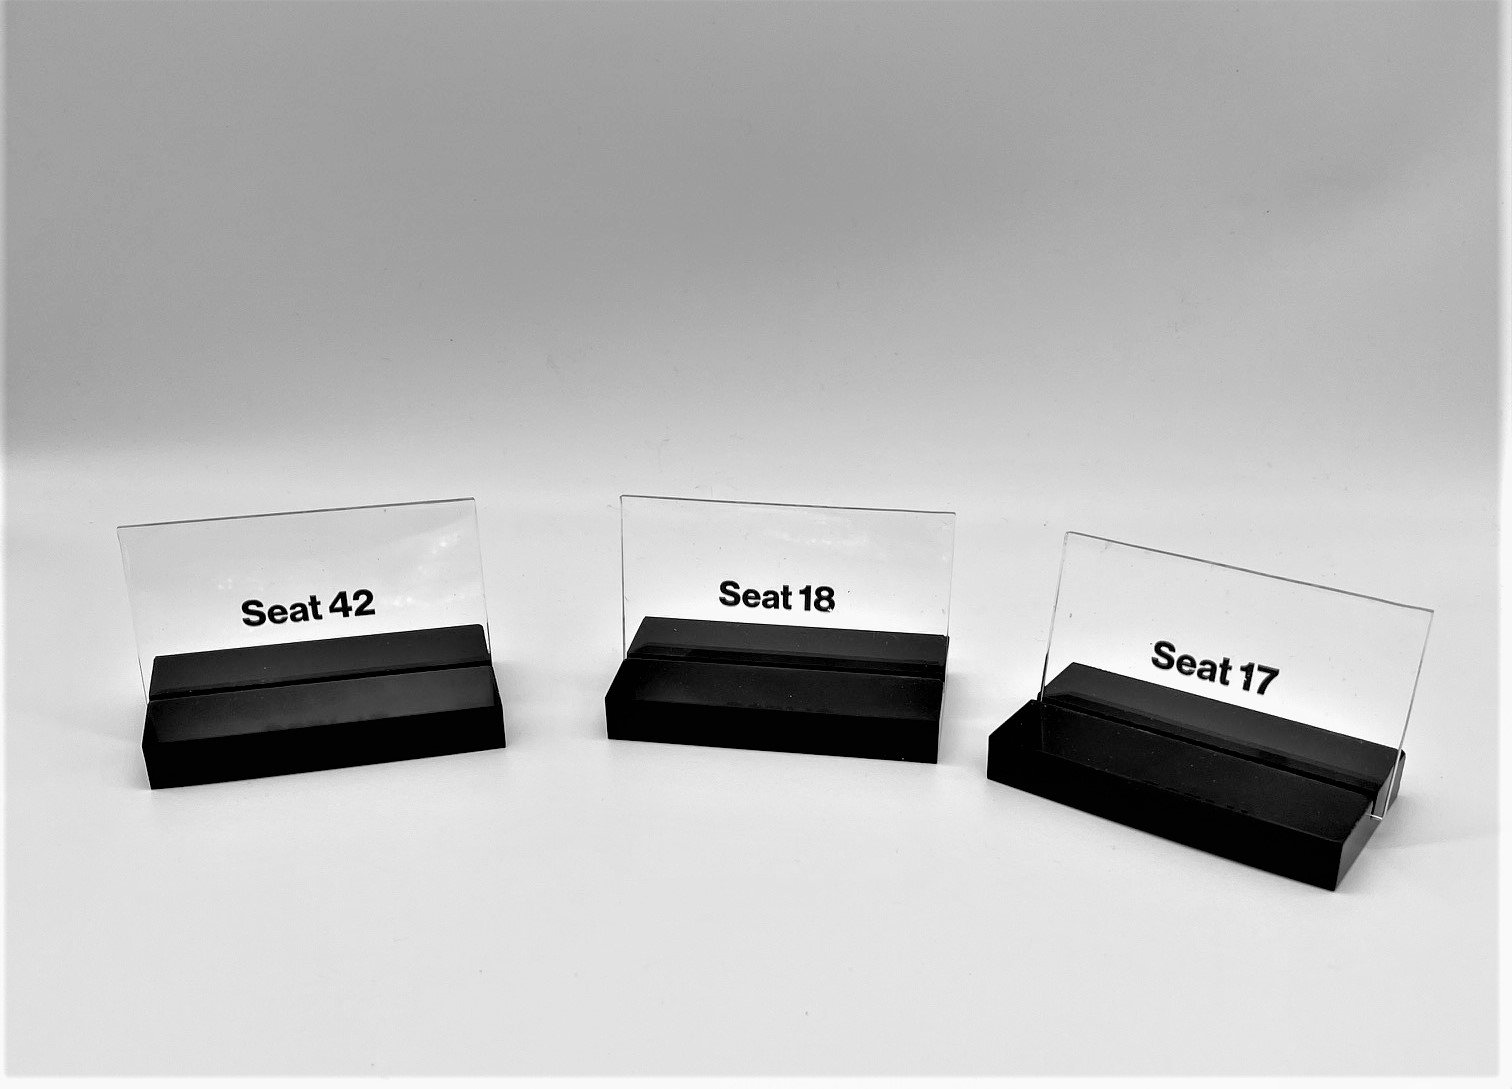 UV Printed Clear Acrylic Seating Placement Cards With Black Acrylic Base